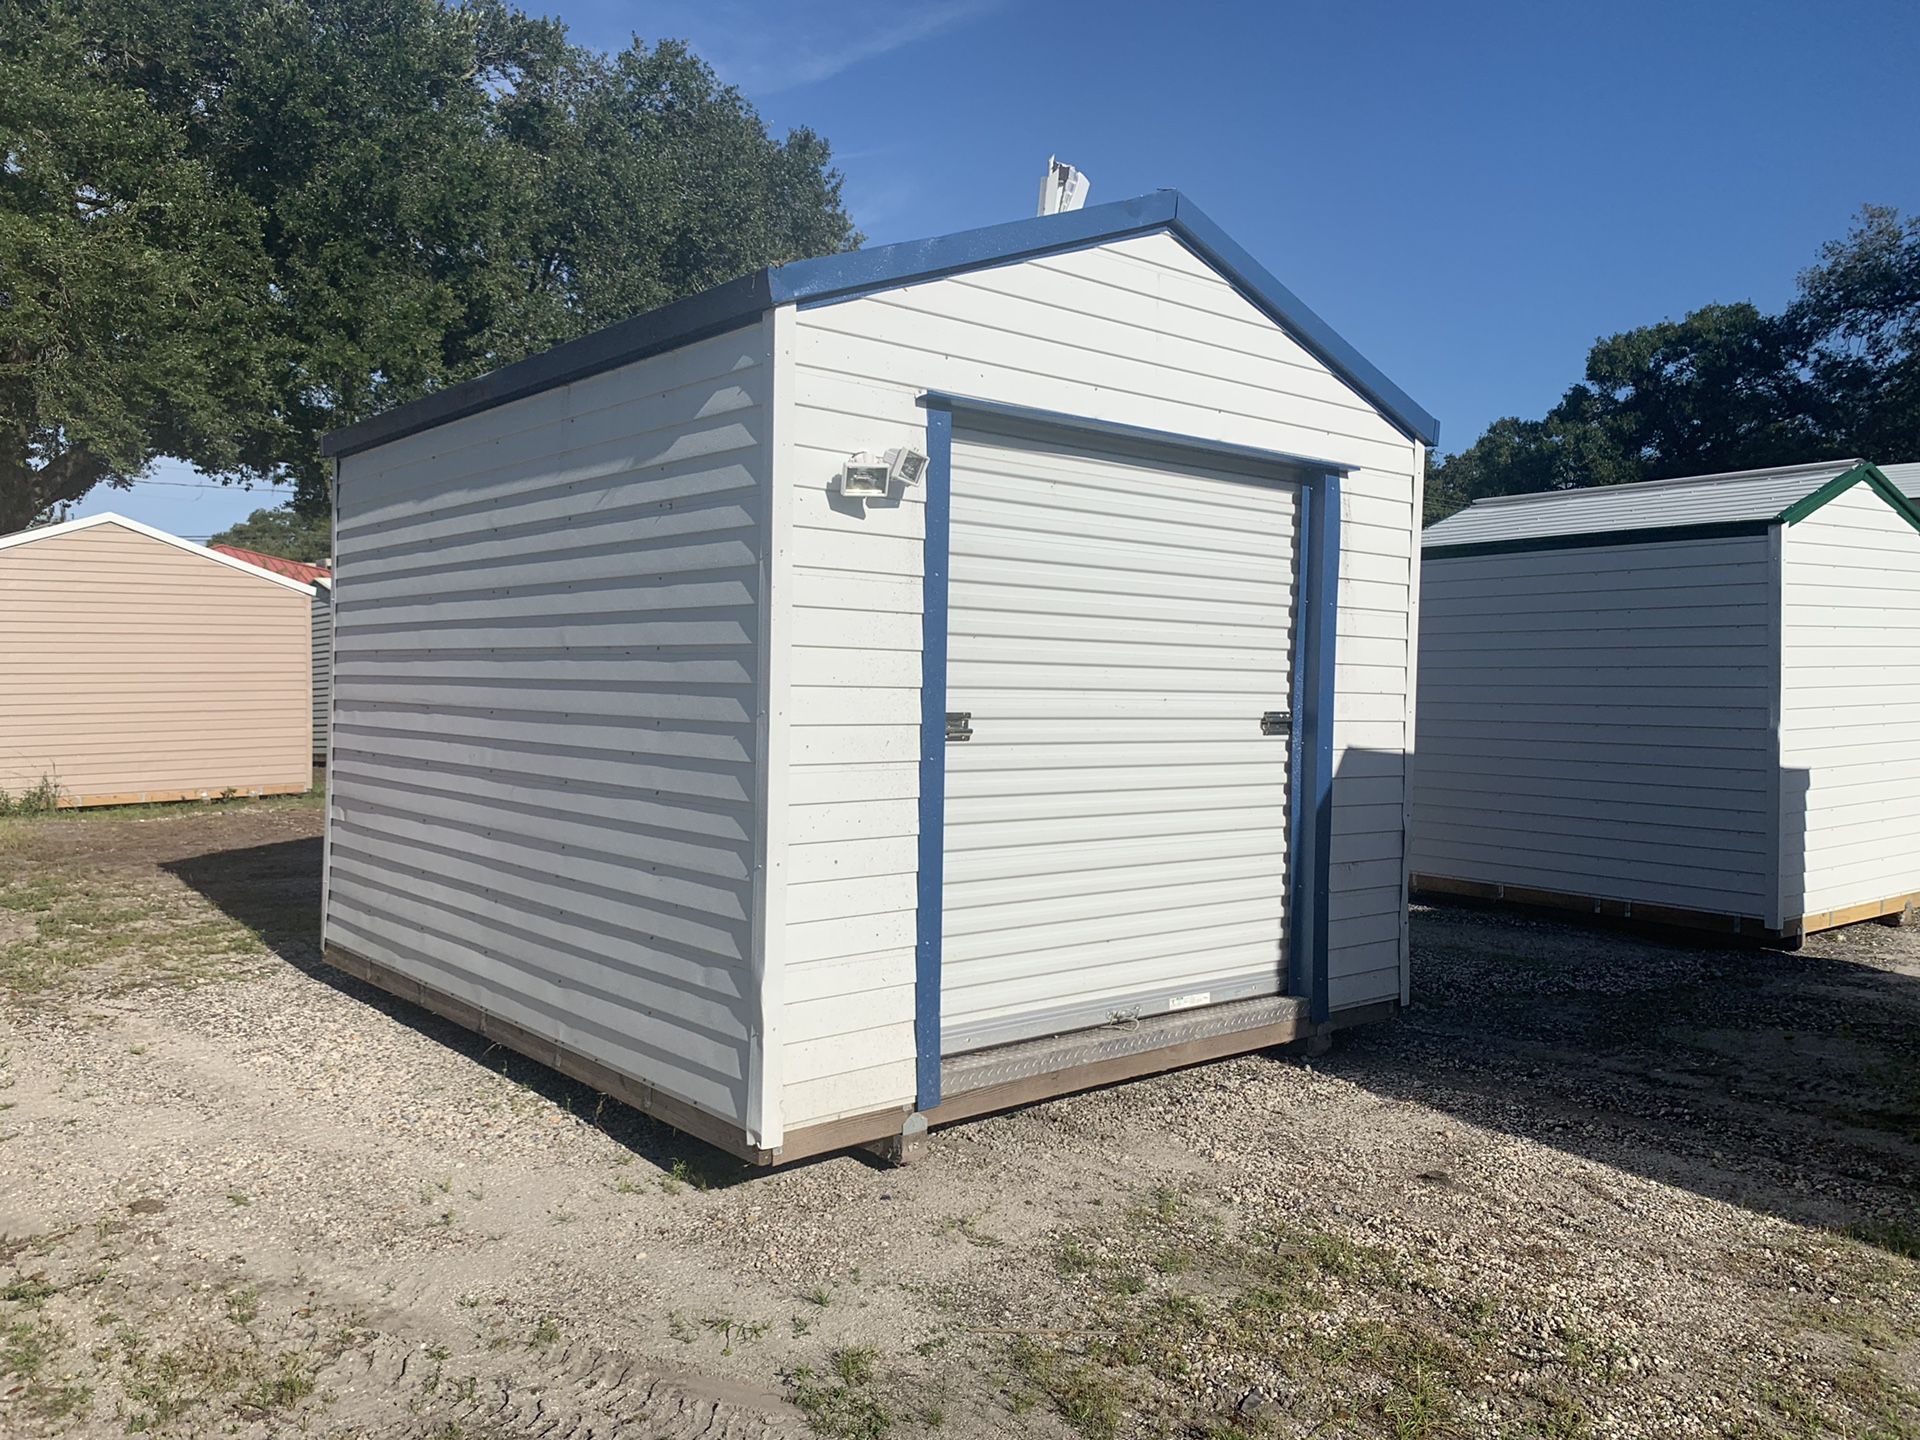 REPO 10x12 Superior Shed! Someone’s loss is your gain!